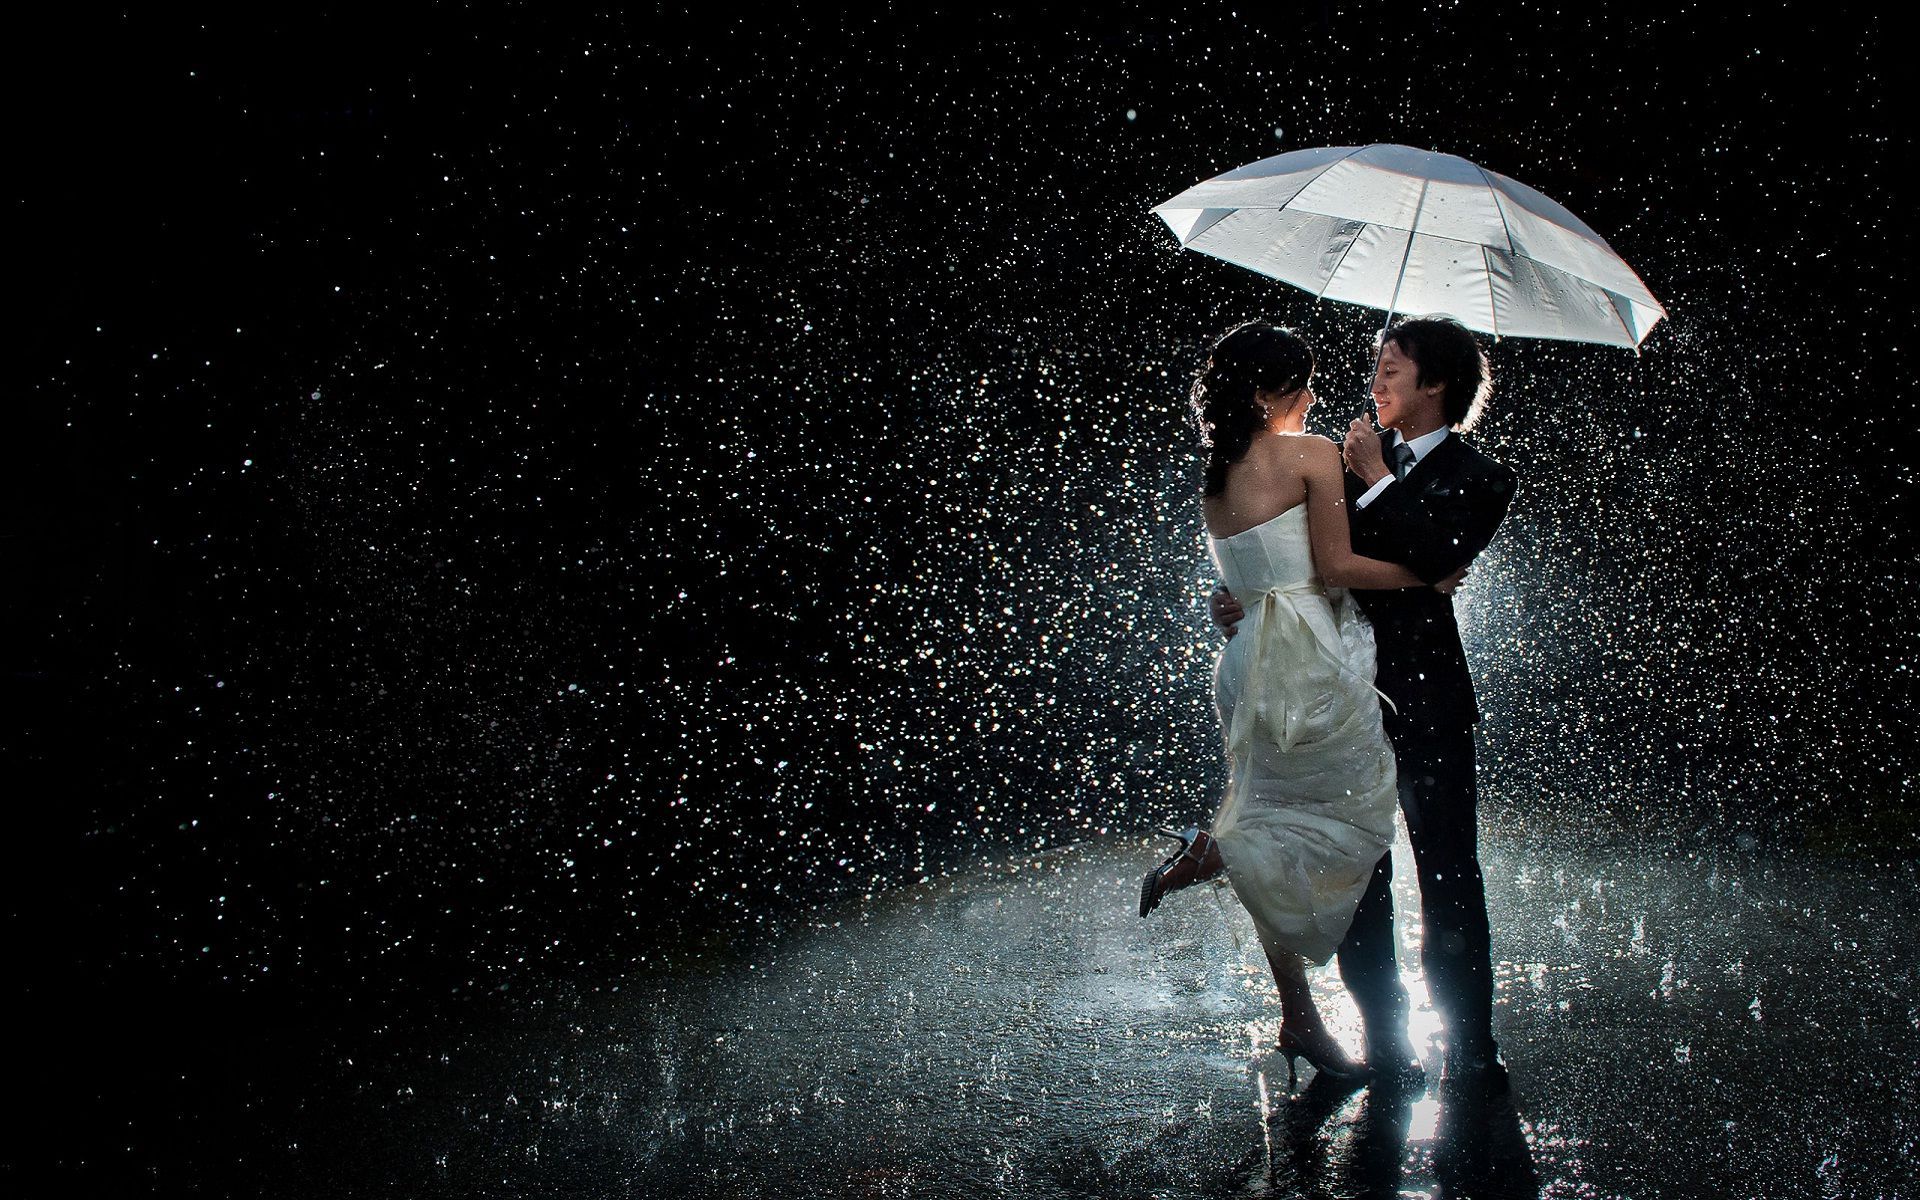 Romantic Couple Love In Rain At Night Wallpapers